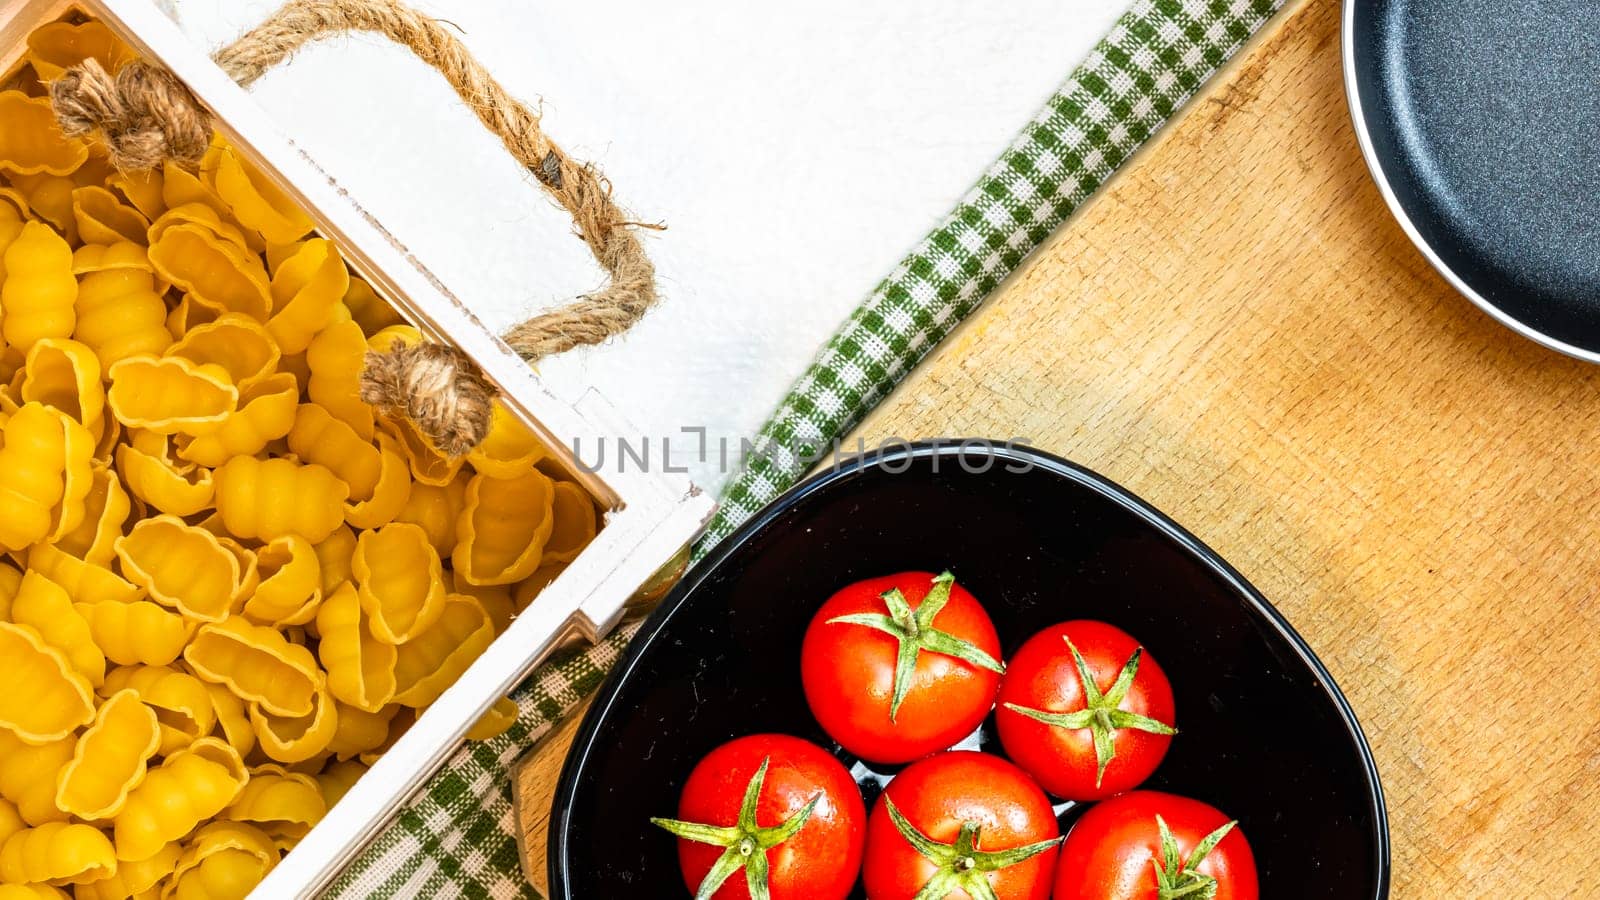 Beautiful tasty Italian pasta, tomatoes, onions and garlic for cooking pasta by vladispas